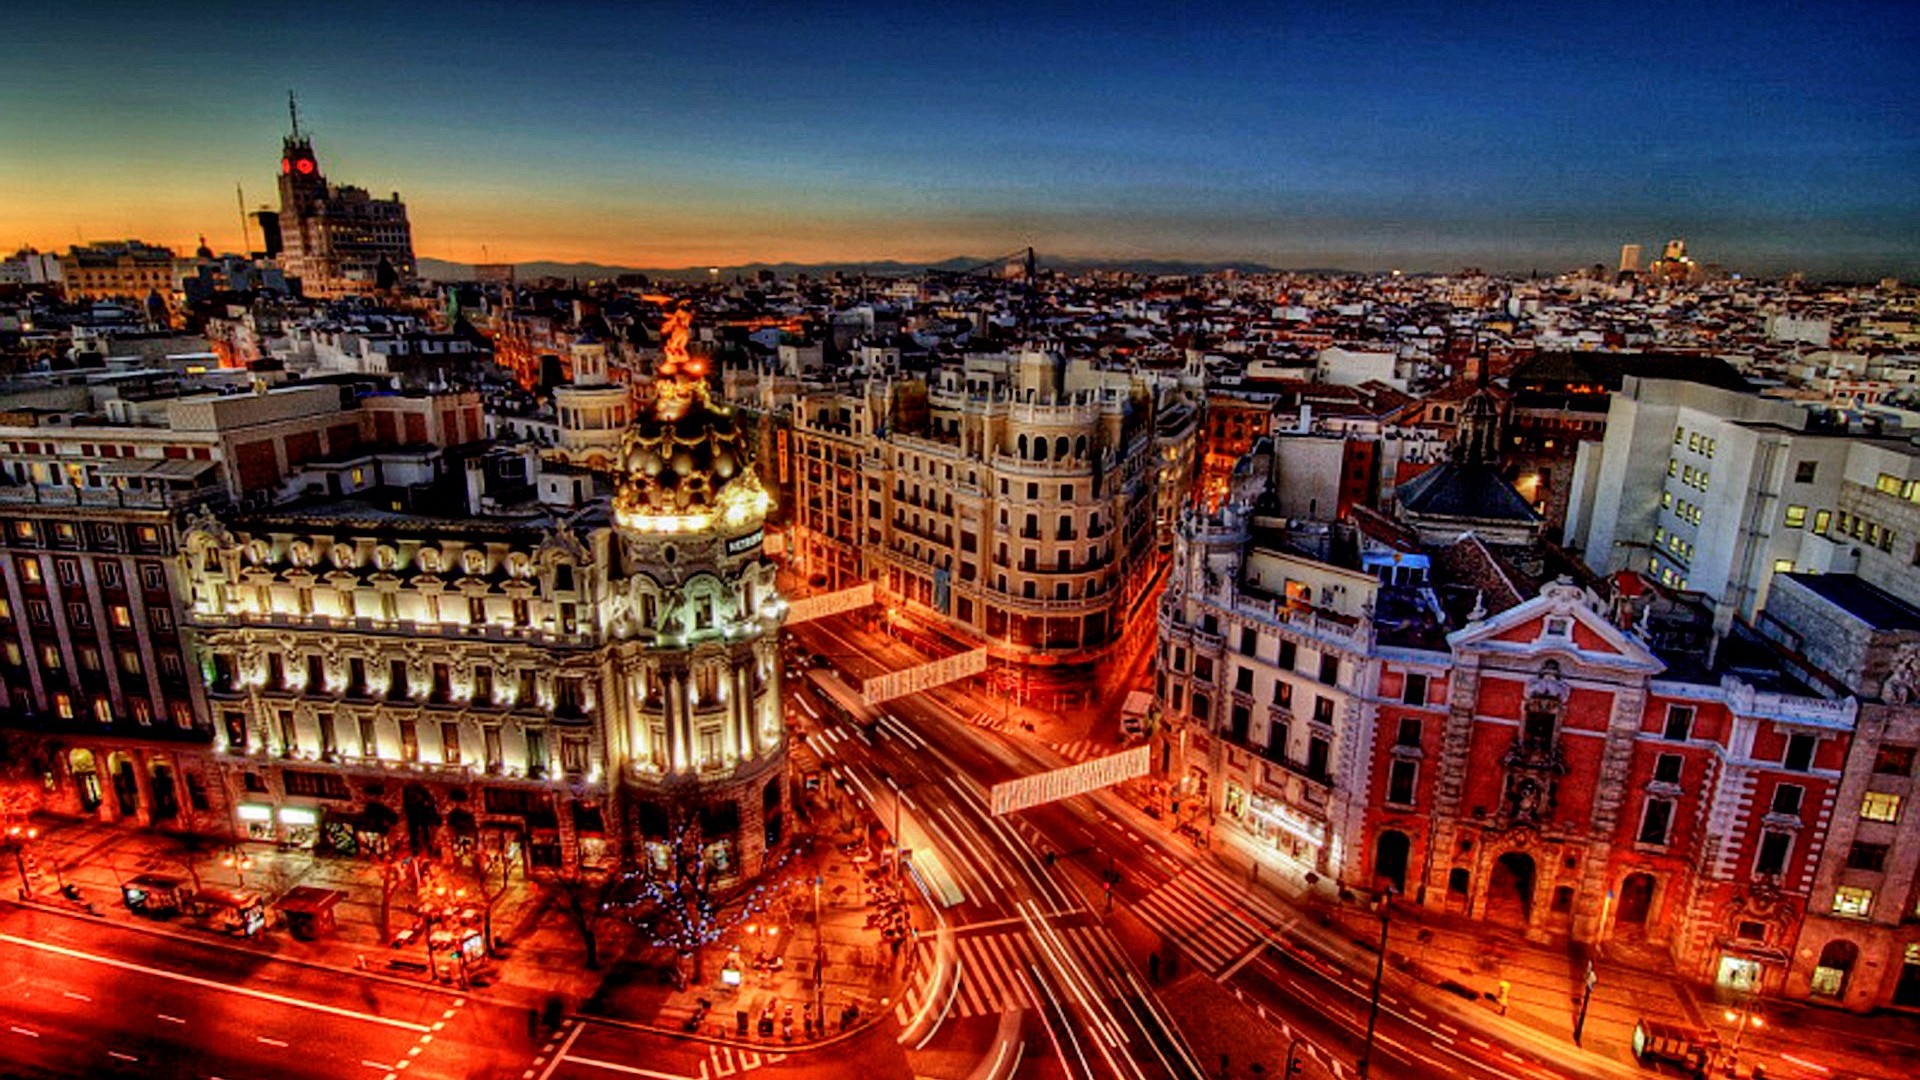 Good Madrid Images Full Hd Quality For Mobile - Madrid Wallpaper Hd - HD Wallpaper 